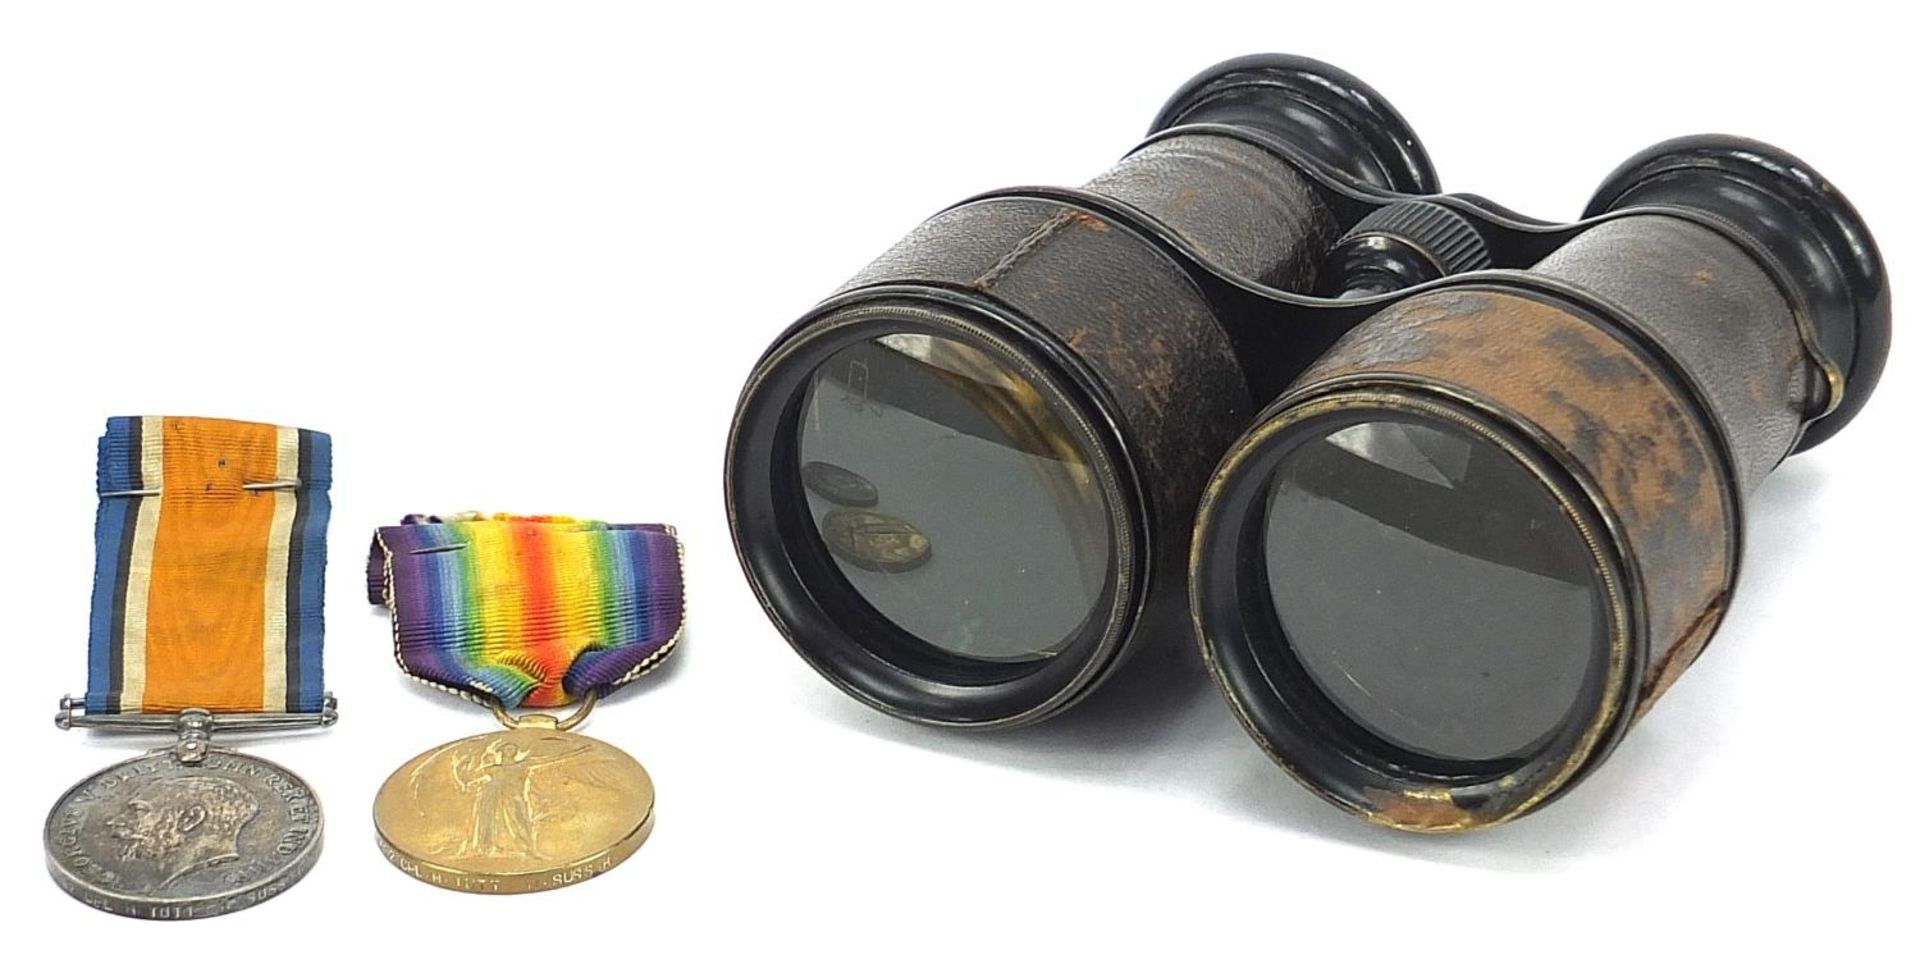 British military World War I pair and leather bound binoculars, the pair awarded to 1482CPL.H.TUTT.